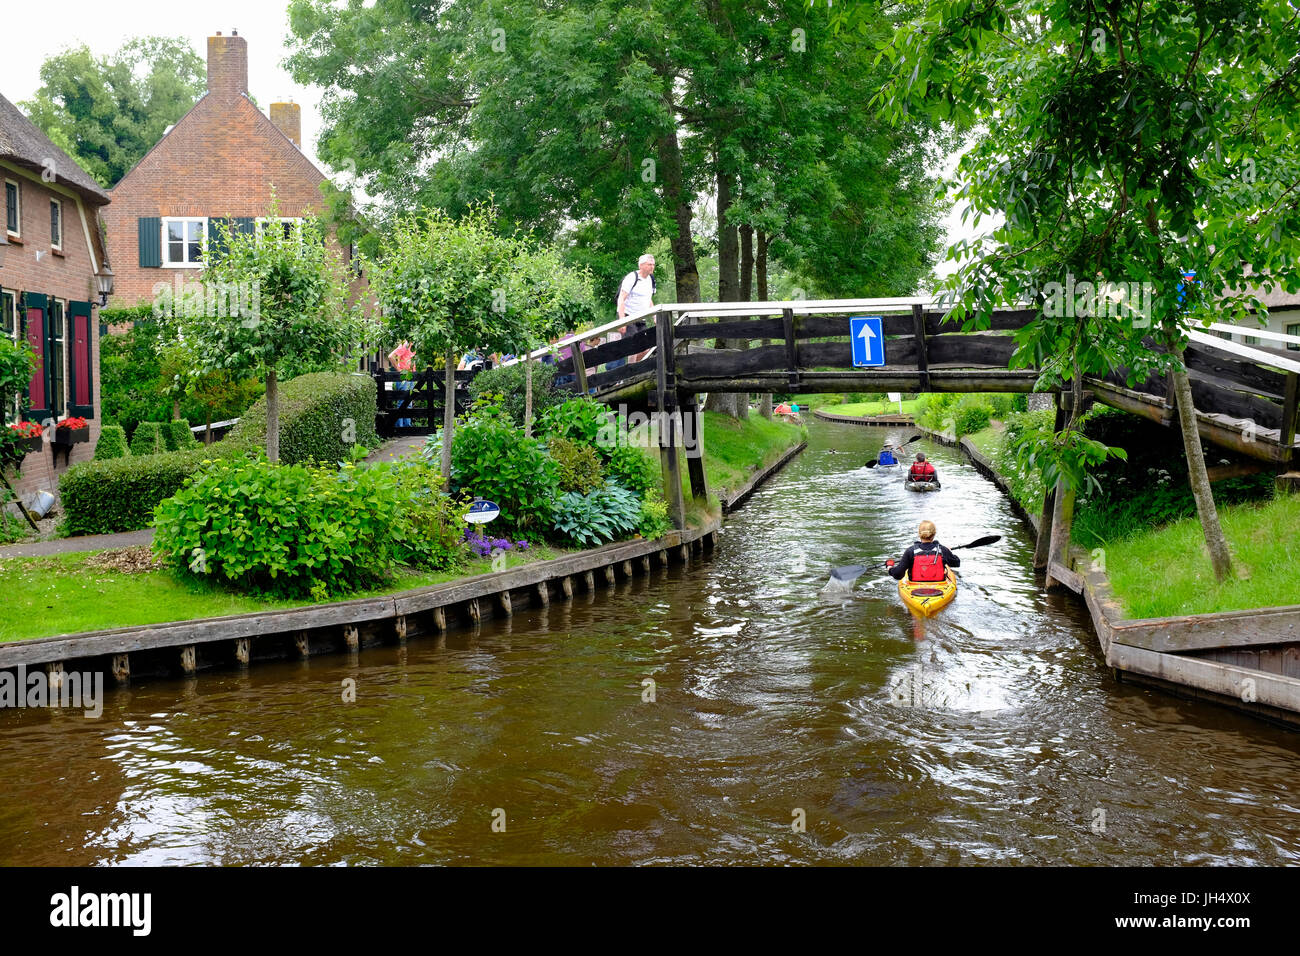 Giethoorn Village Holland Netherlands Also Known As The Venice Of